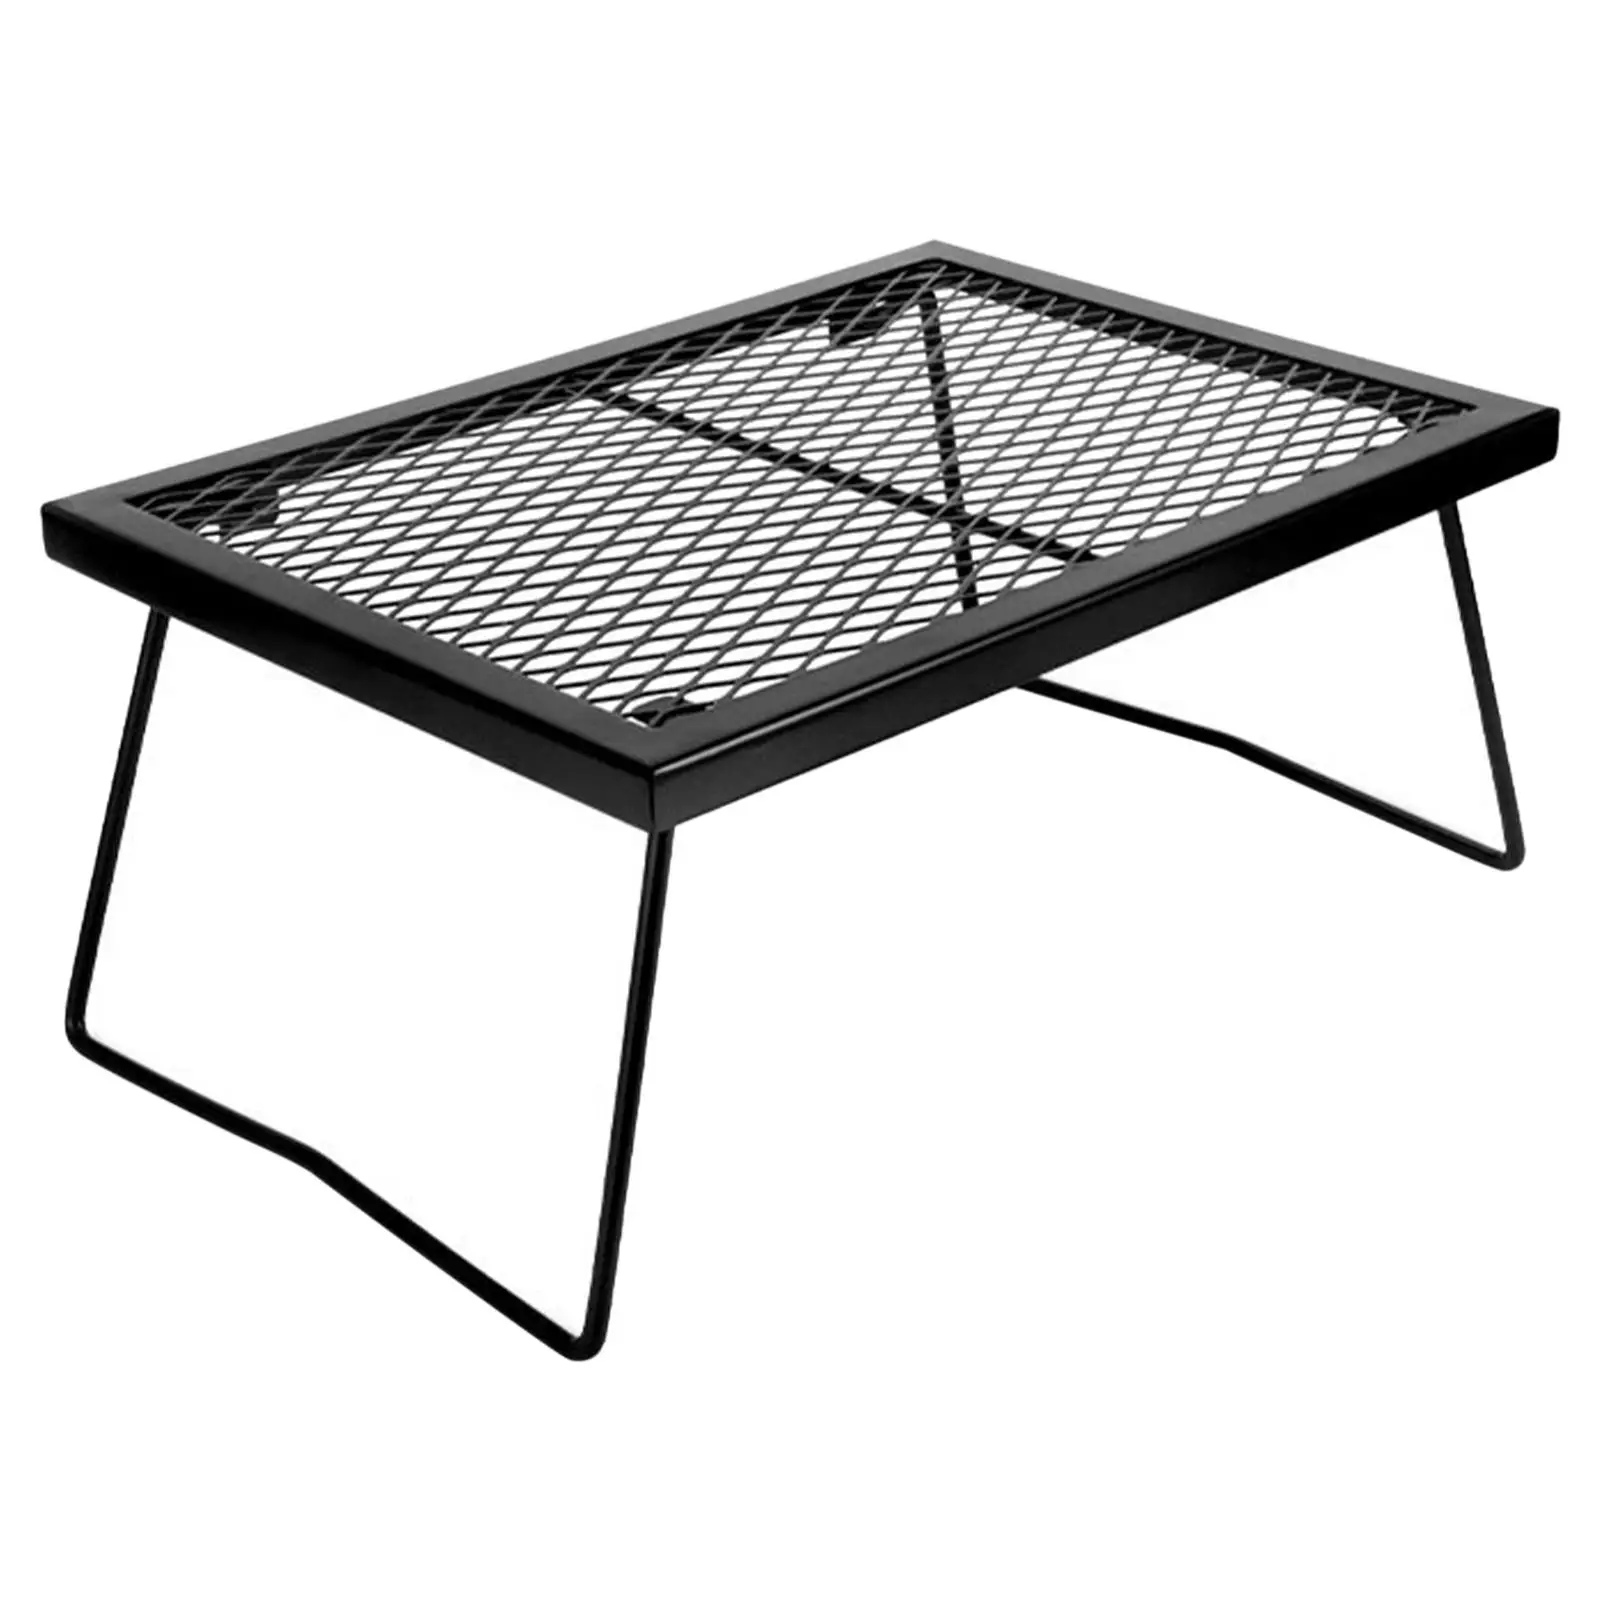 Portable Folding Camping Table Grill Plate for Travel Outdoor BBQ